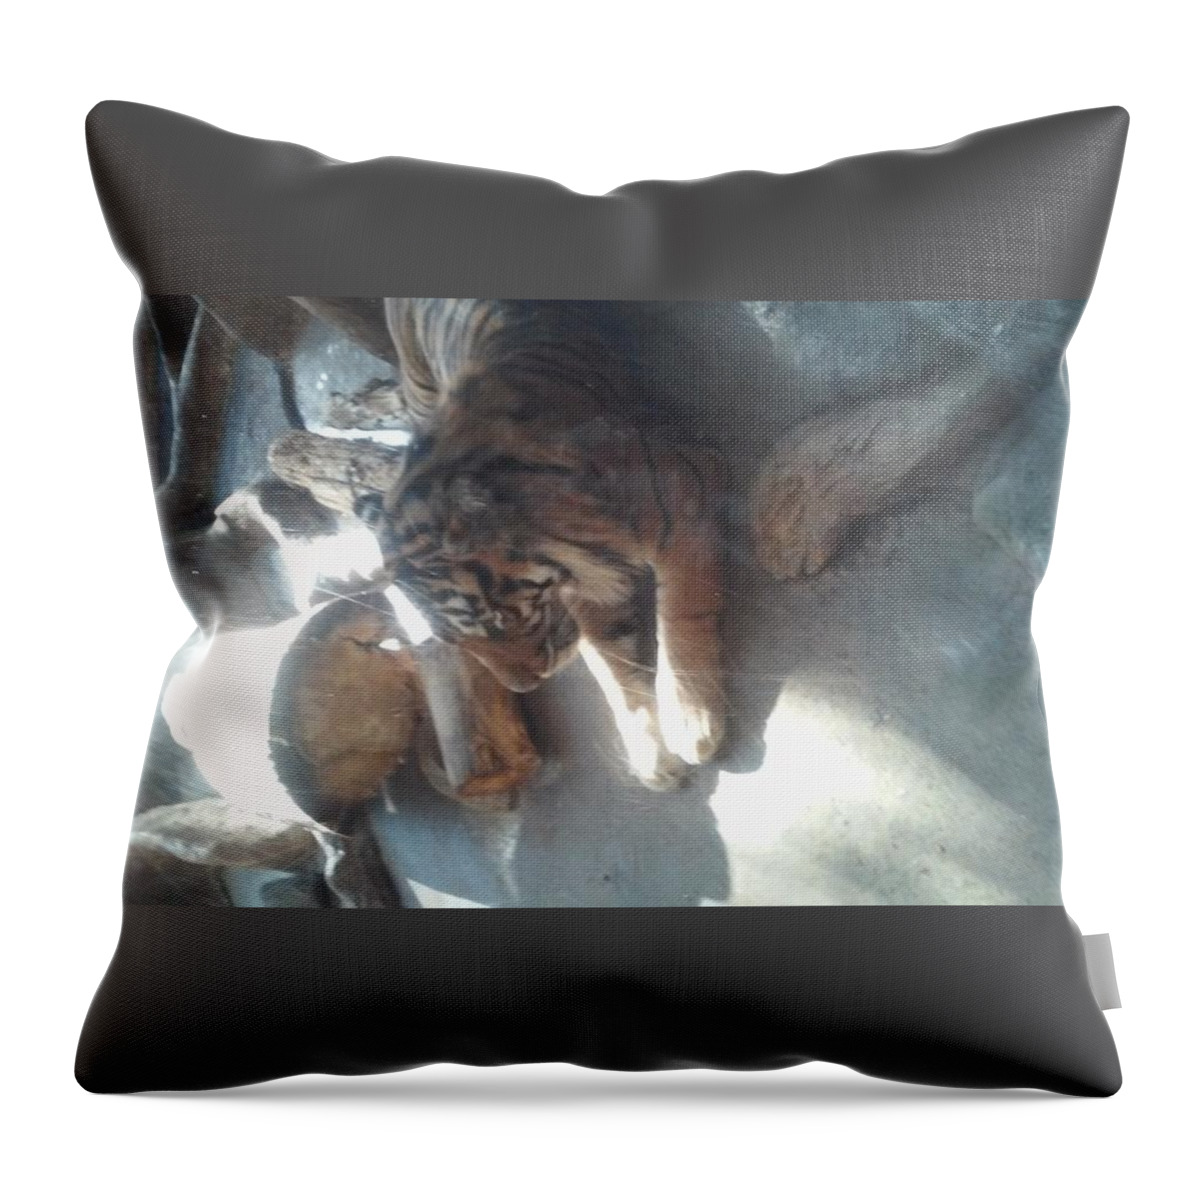 Tiger Throw Pillow featuring the photograph Tiger by Sarah Snyder